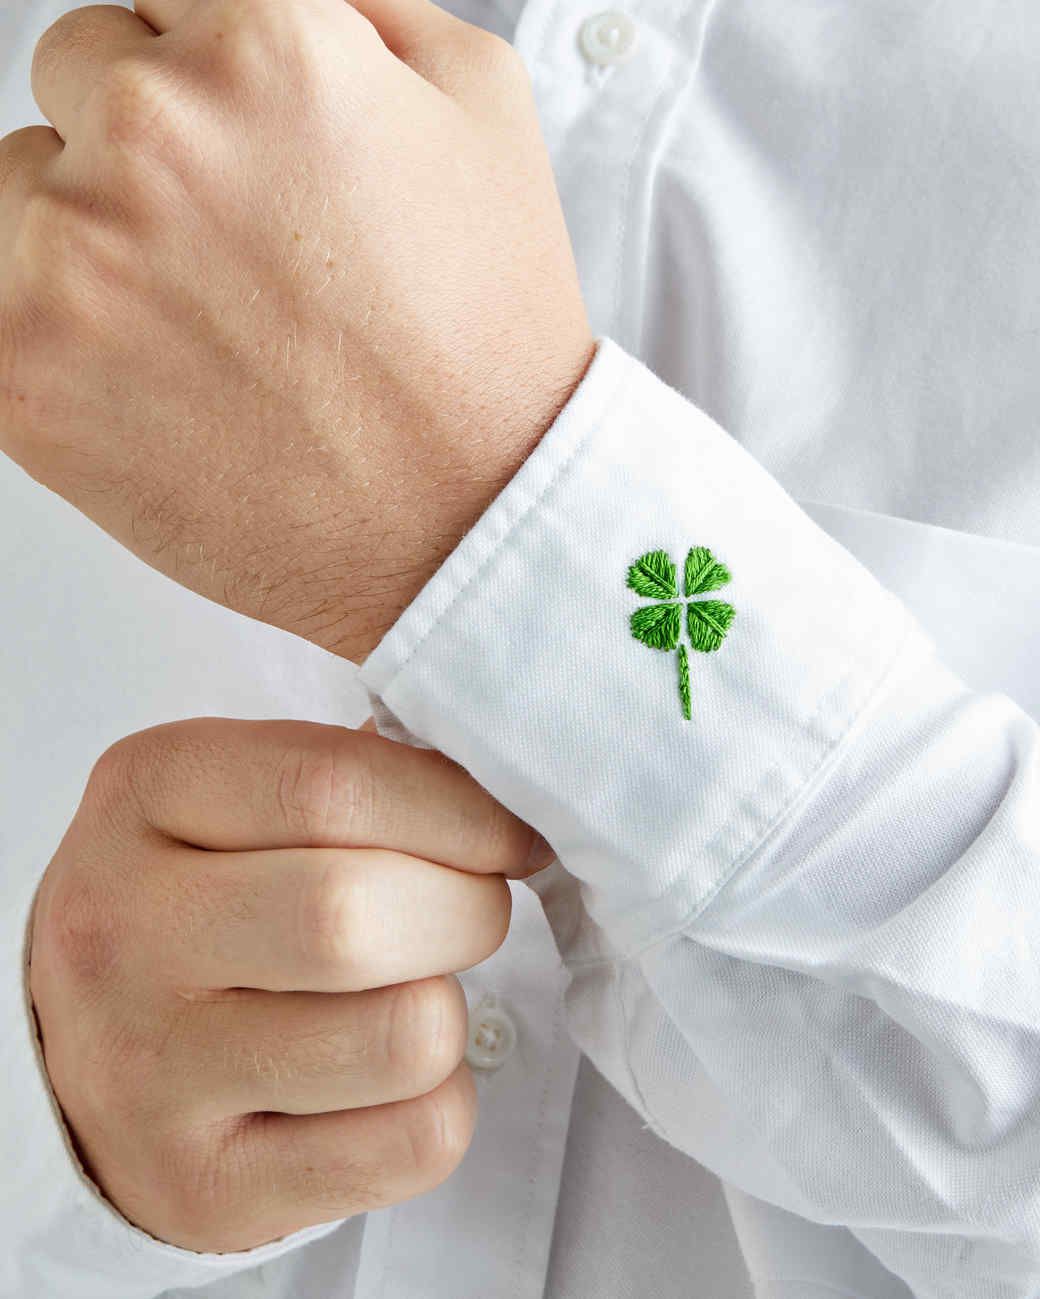 embroidered four-leaf clover on a man's shirt cuff